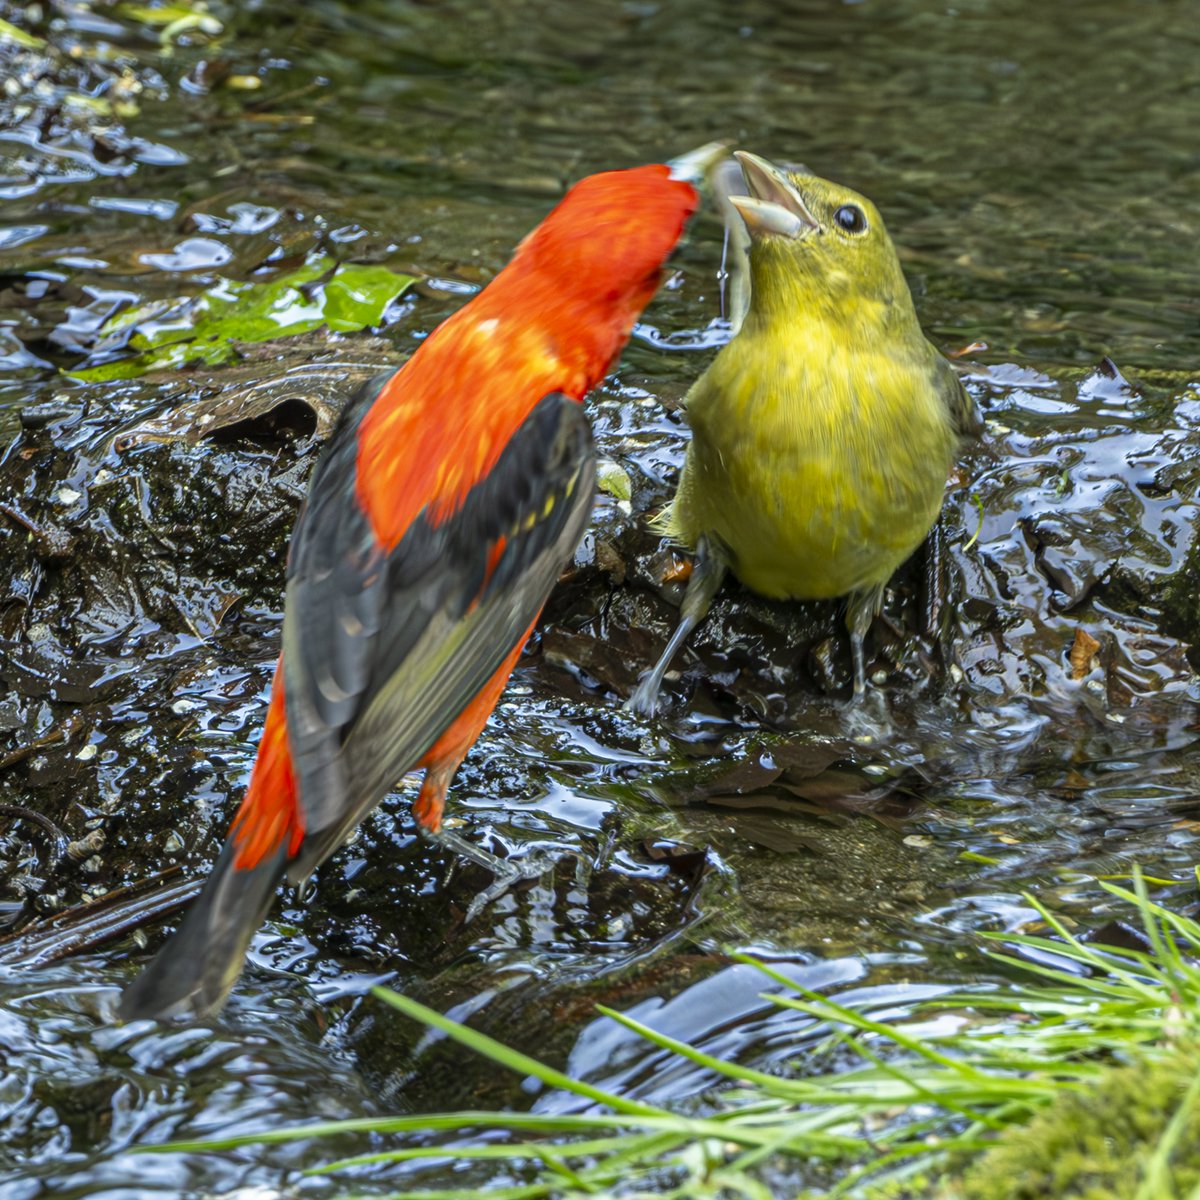 A couple Tanagers on 5/18 meet to exchange greetings, bathing rock, Central Park, NYC #birdwatching #naturelovers #birdcpp #TwitterNatureCommunity #birdsofinstagram #birds #birdsoftwitter  #birdwatchingphotography #centralpark #birdphotography #warblers